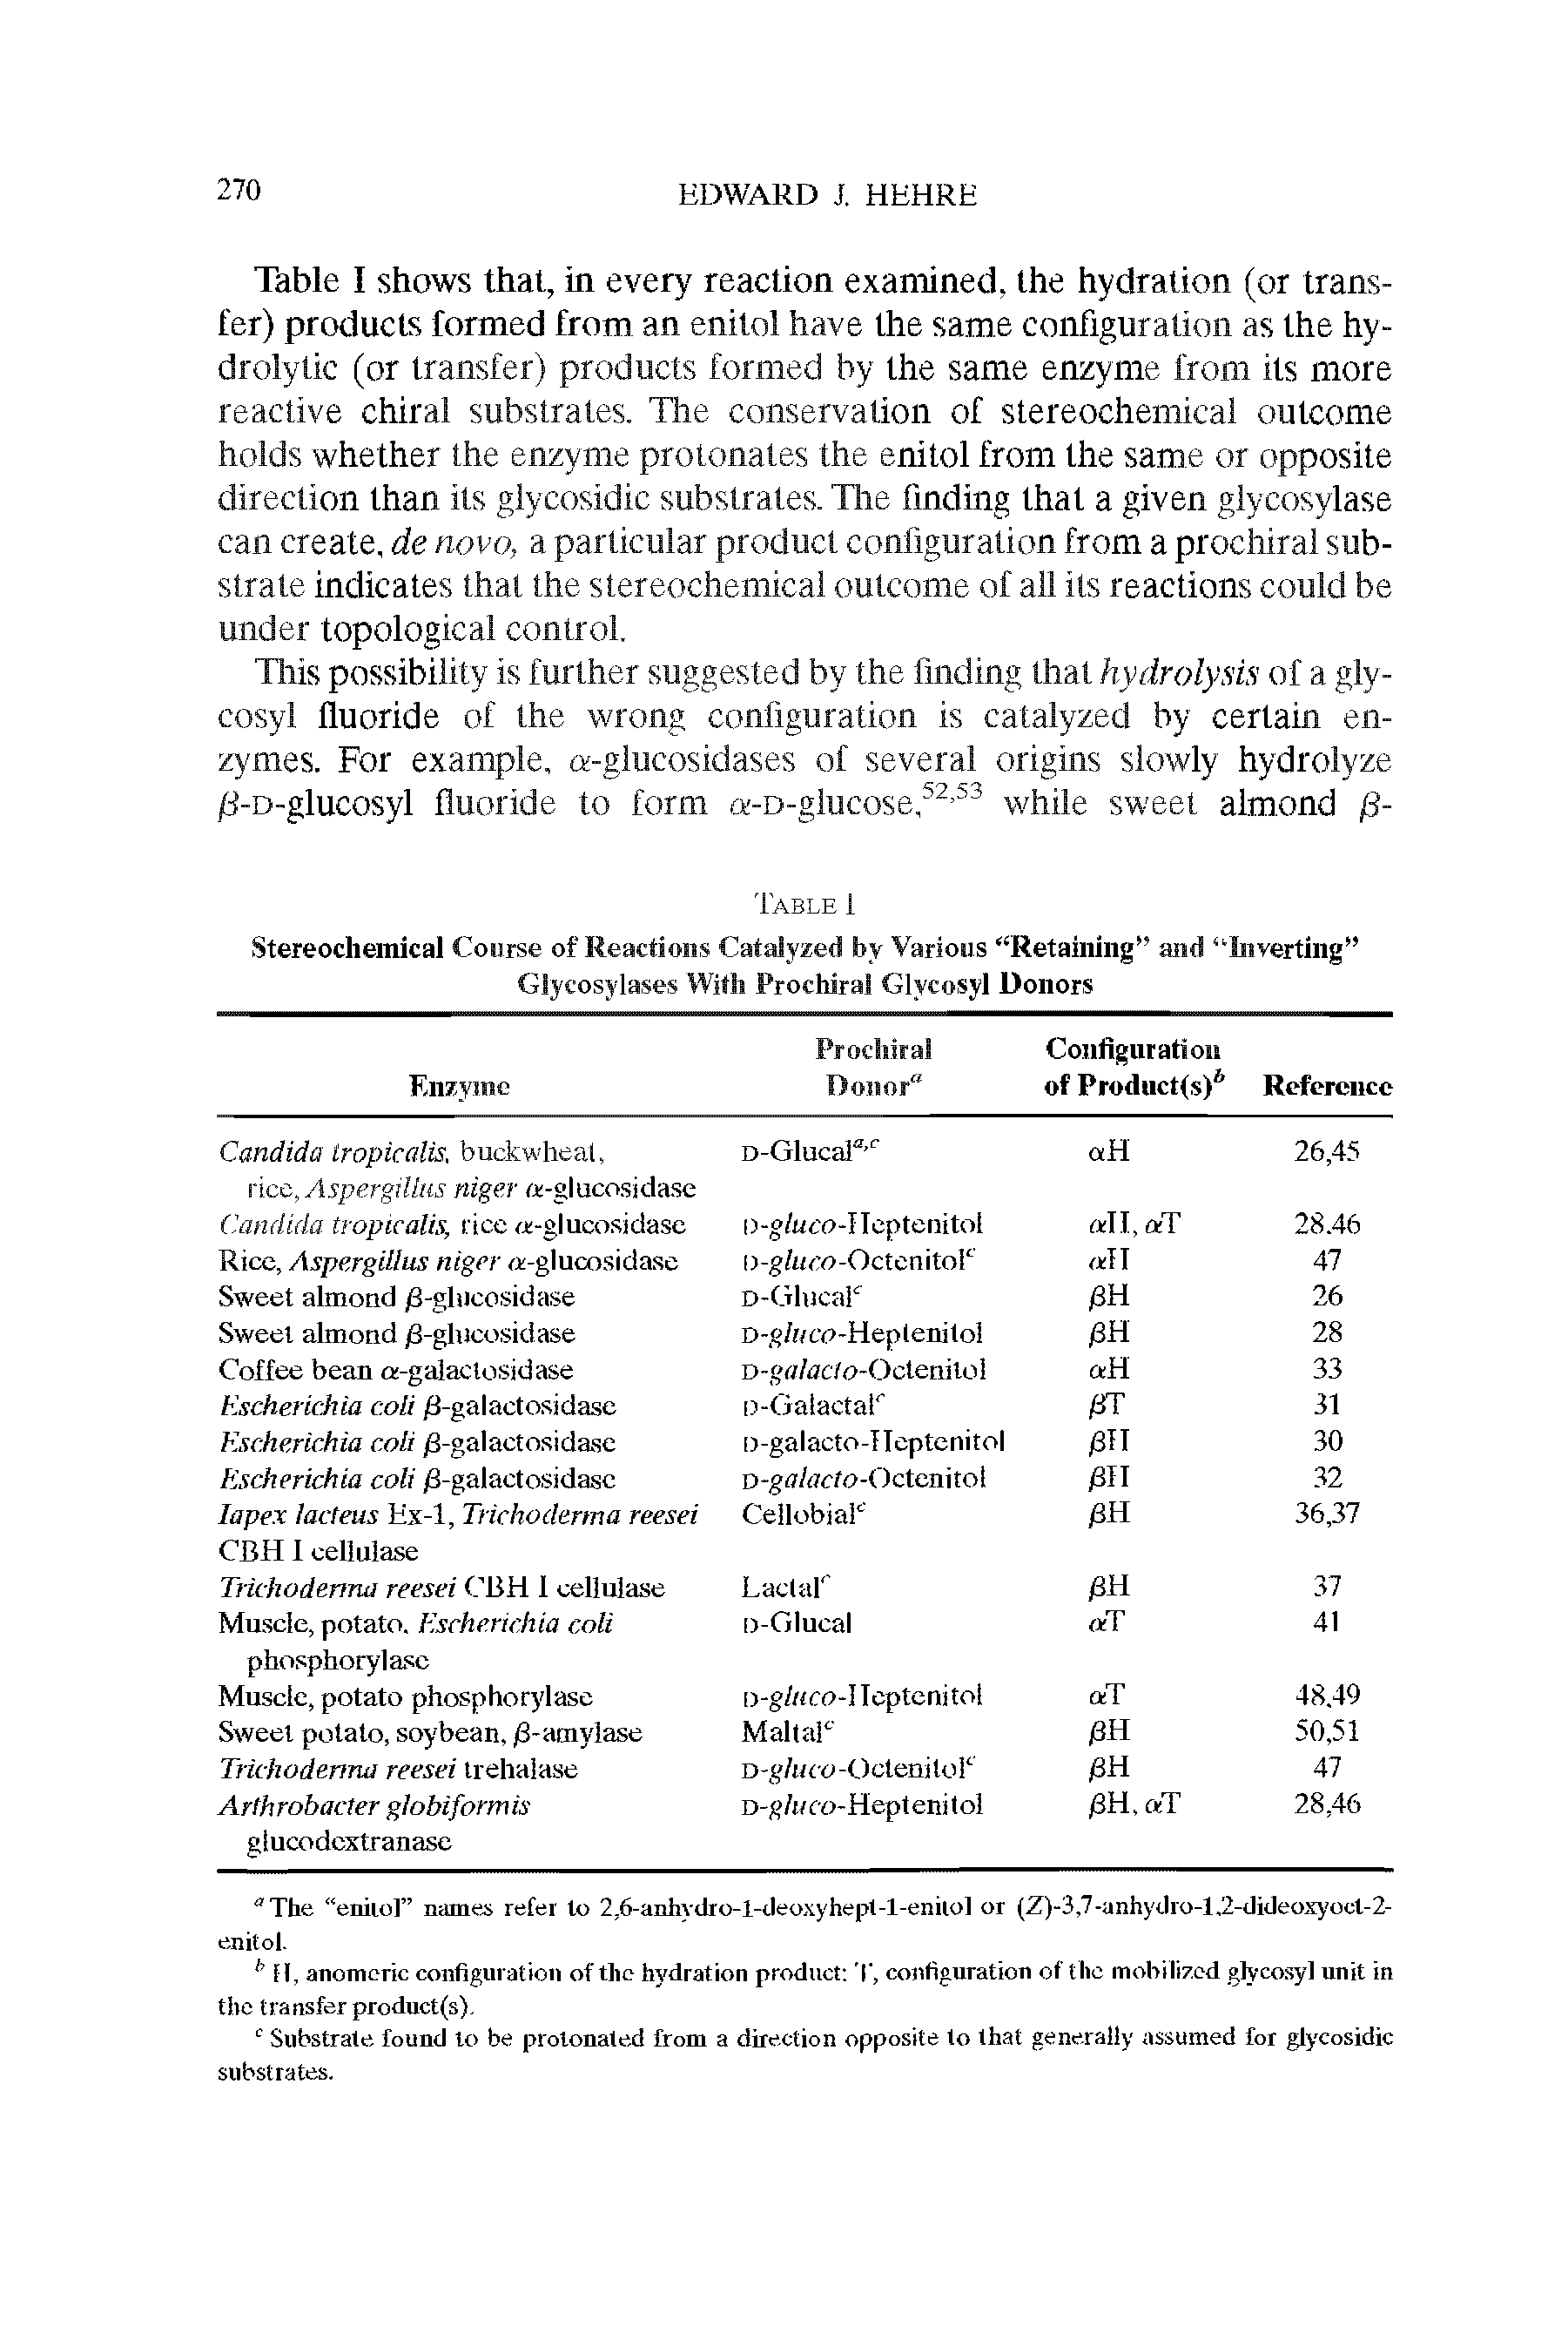 Table I shows that, in every reaction examined, the hydration (or transfer) products formed from an enitol have the same configuration as the hydrolytic (or transfer) products formed by the same enzyme from its more reactive chiral substrates. The conservation of stereochemical outcome holds whether the enzyme protonates the enitol from the same or opposite direction than its glycosidic substrates. The finding that a given glycosylase can create, de novo, a particular product configuration from a prochiral substrate indicates that the stereochemical outcome of all its reactions could be under topological control.